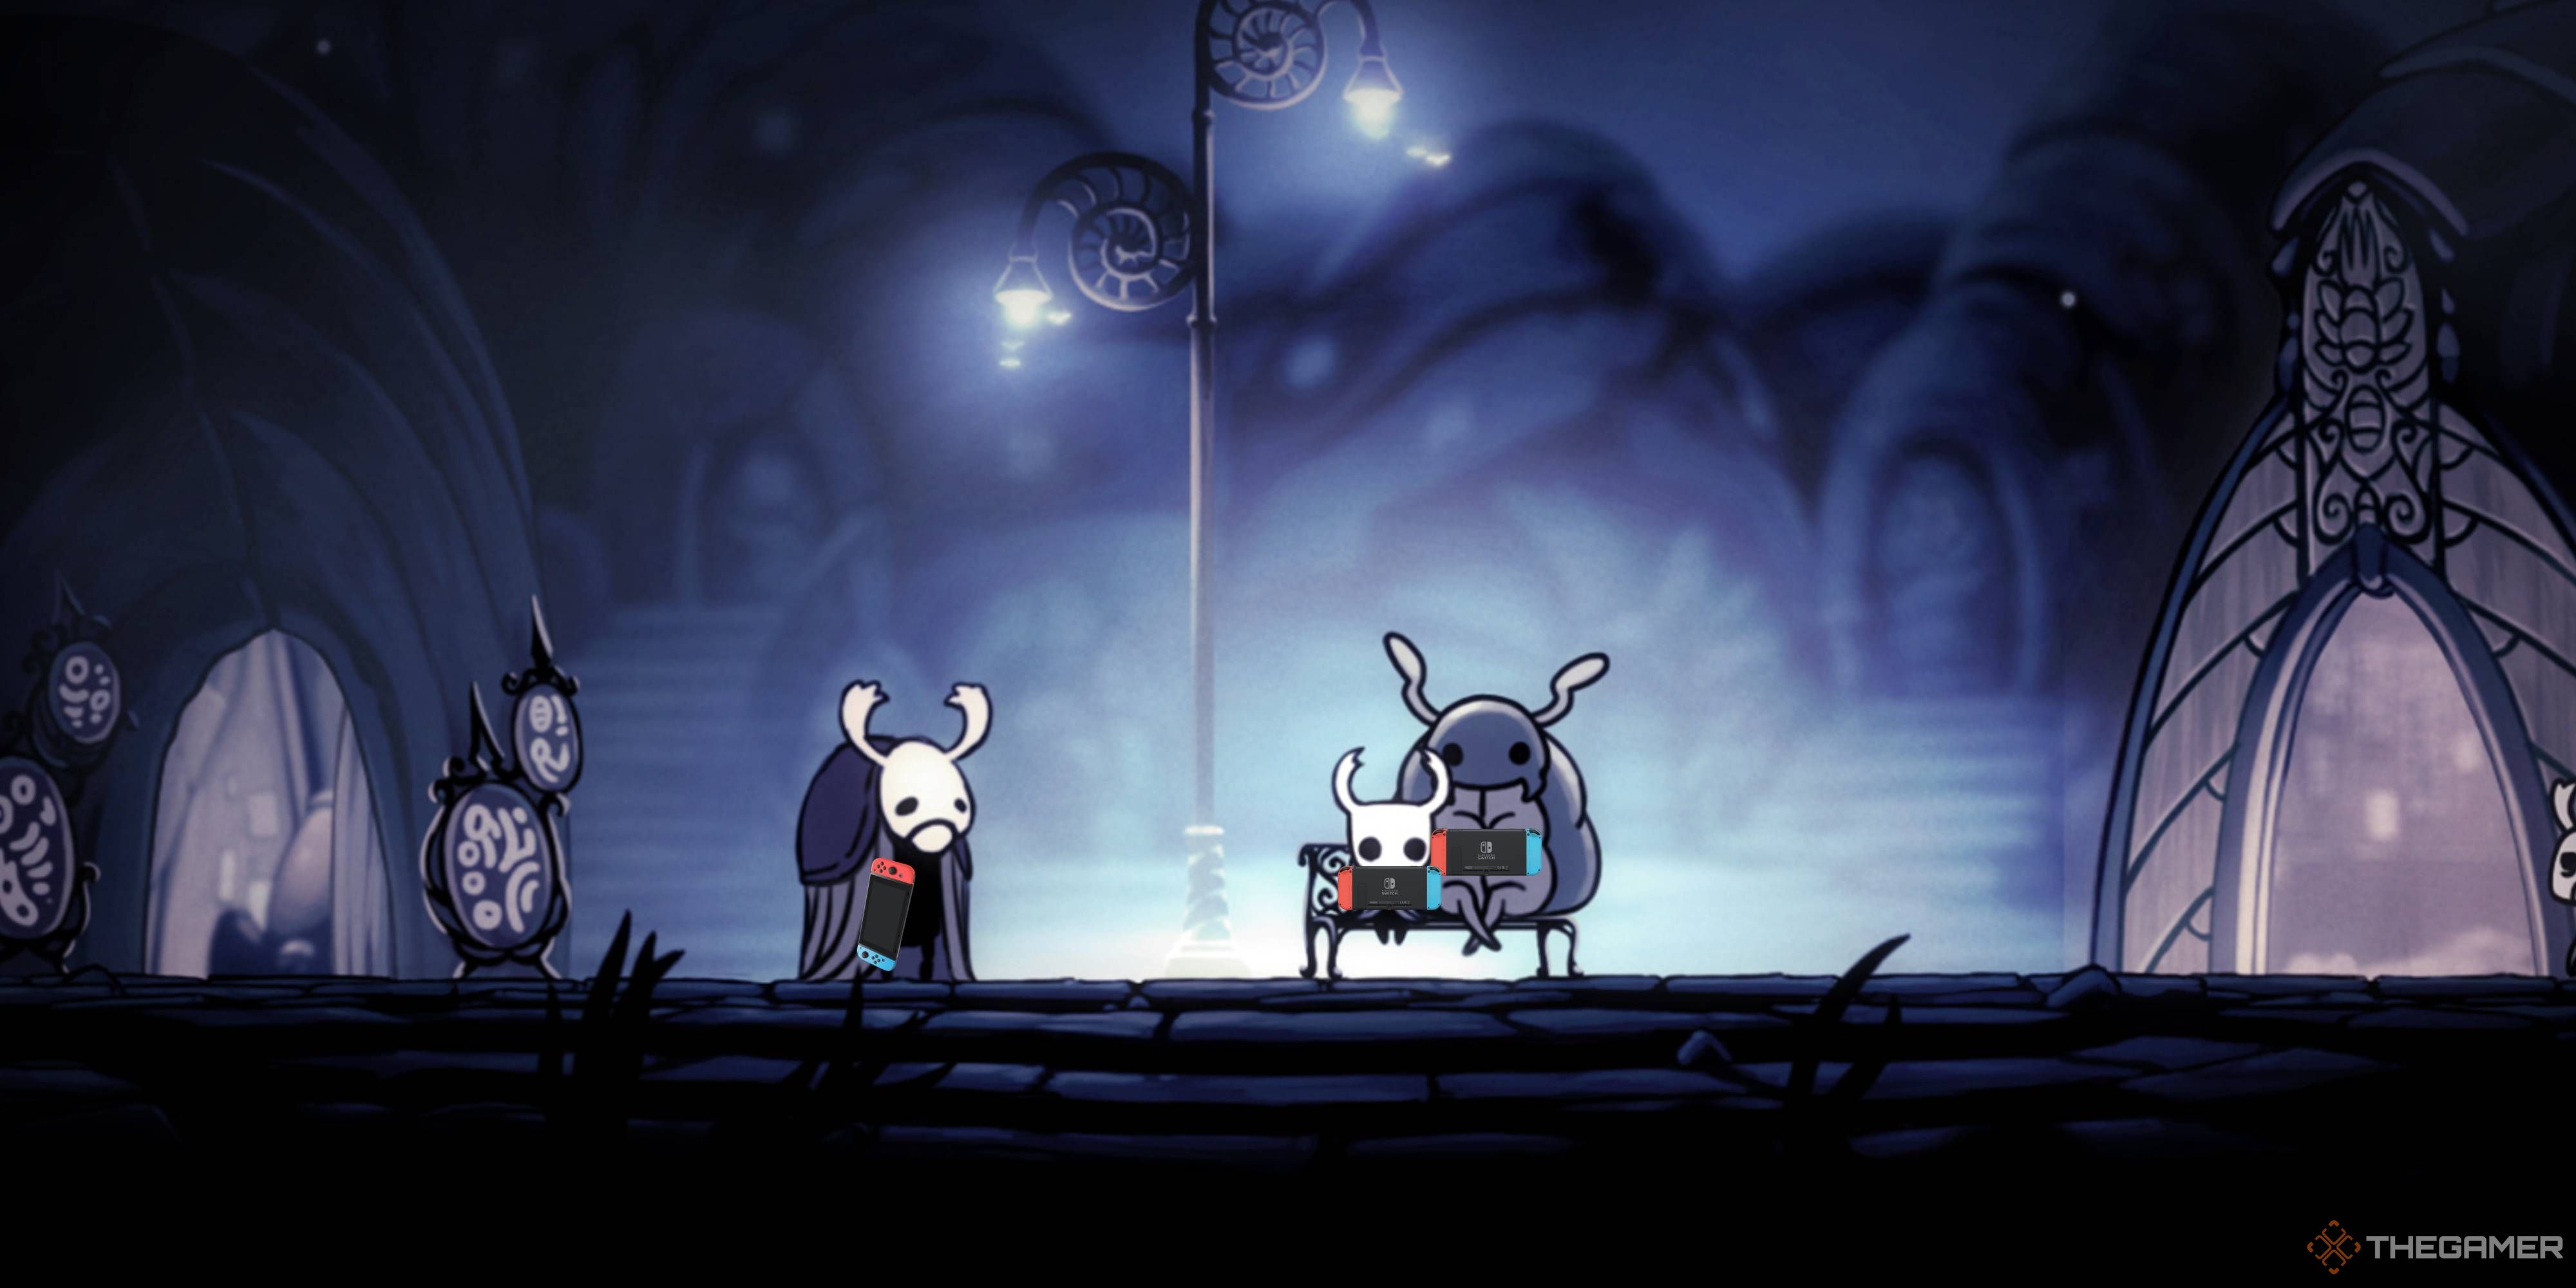 hollow knight characters holding nintendo switch consoles